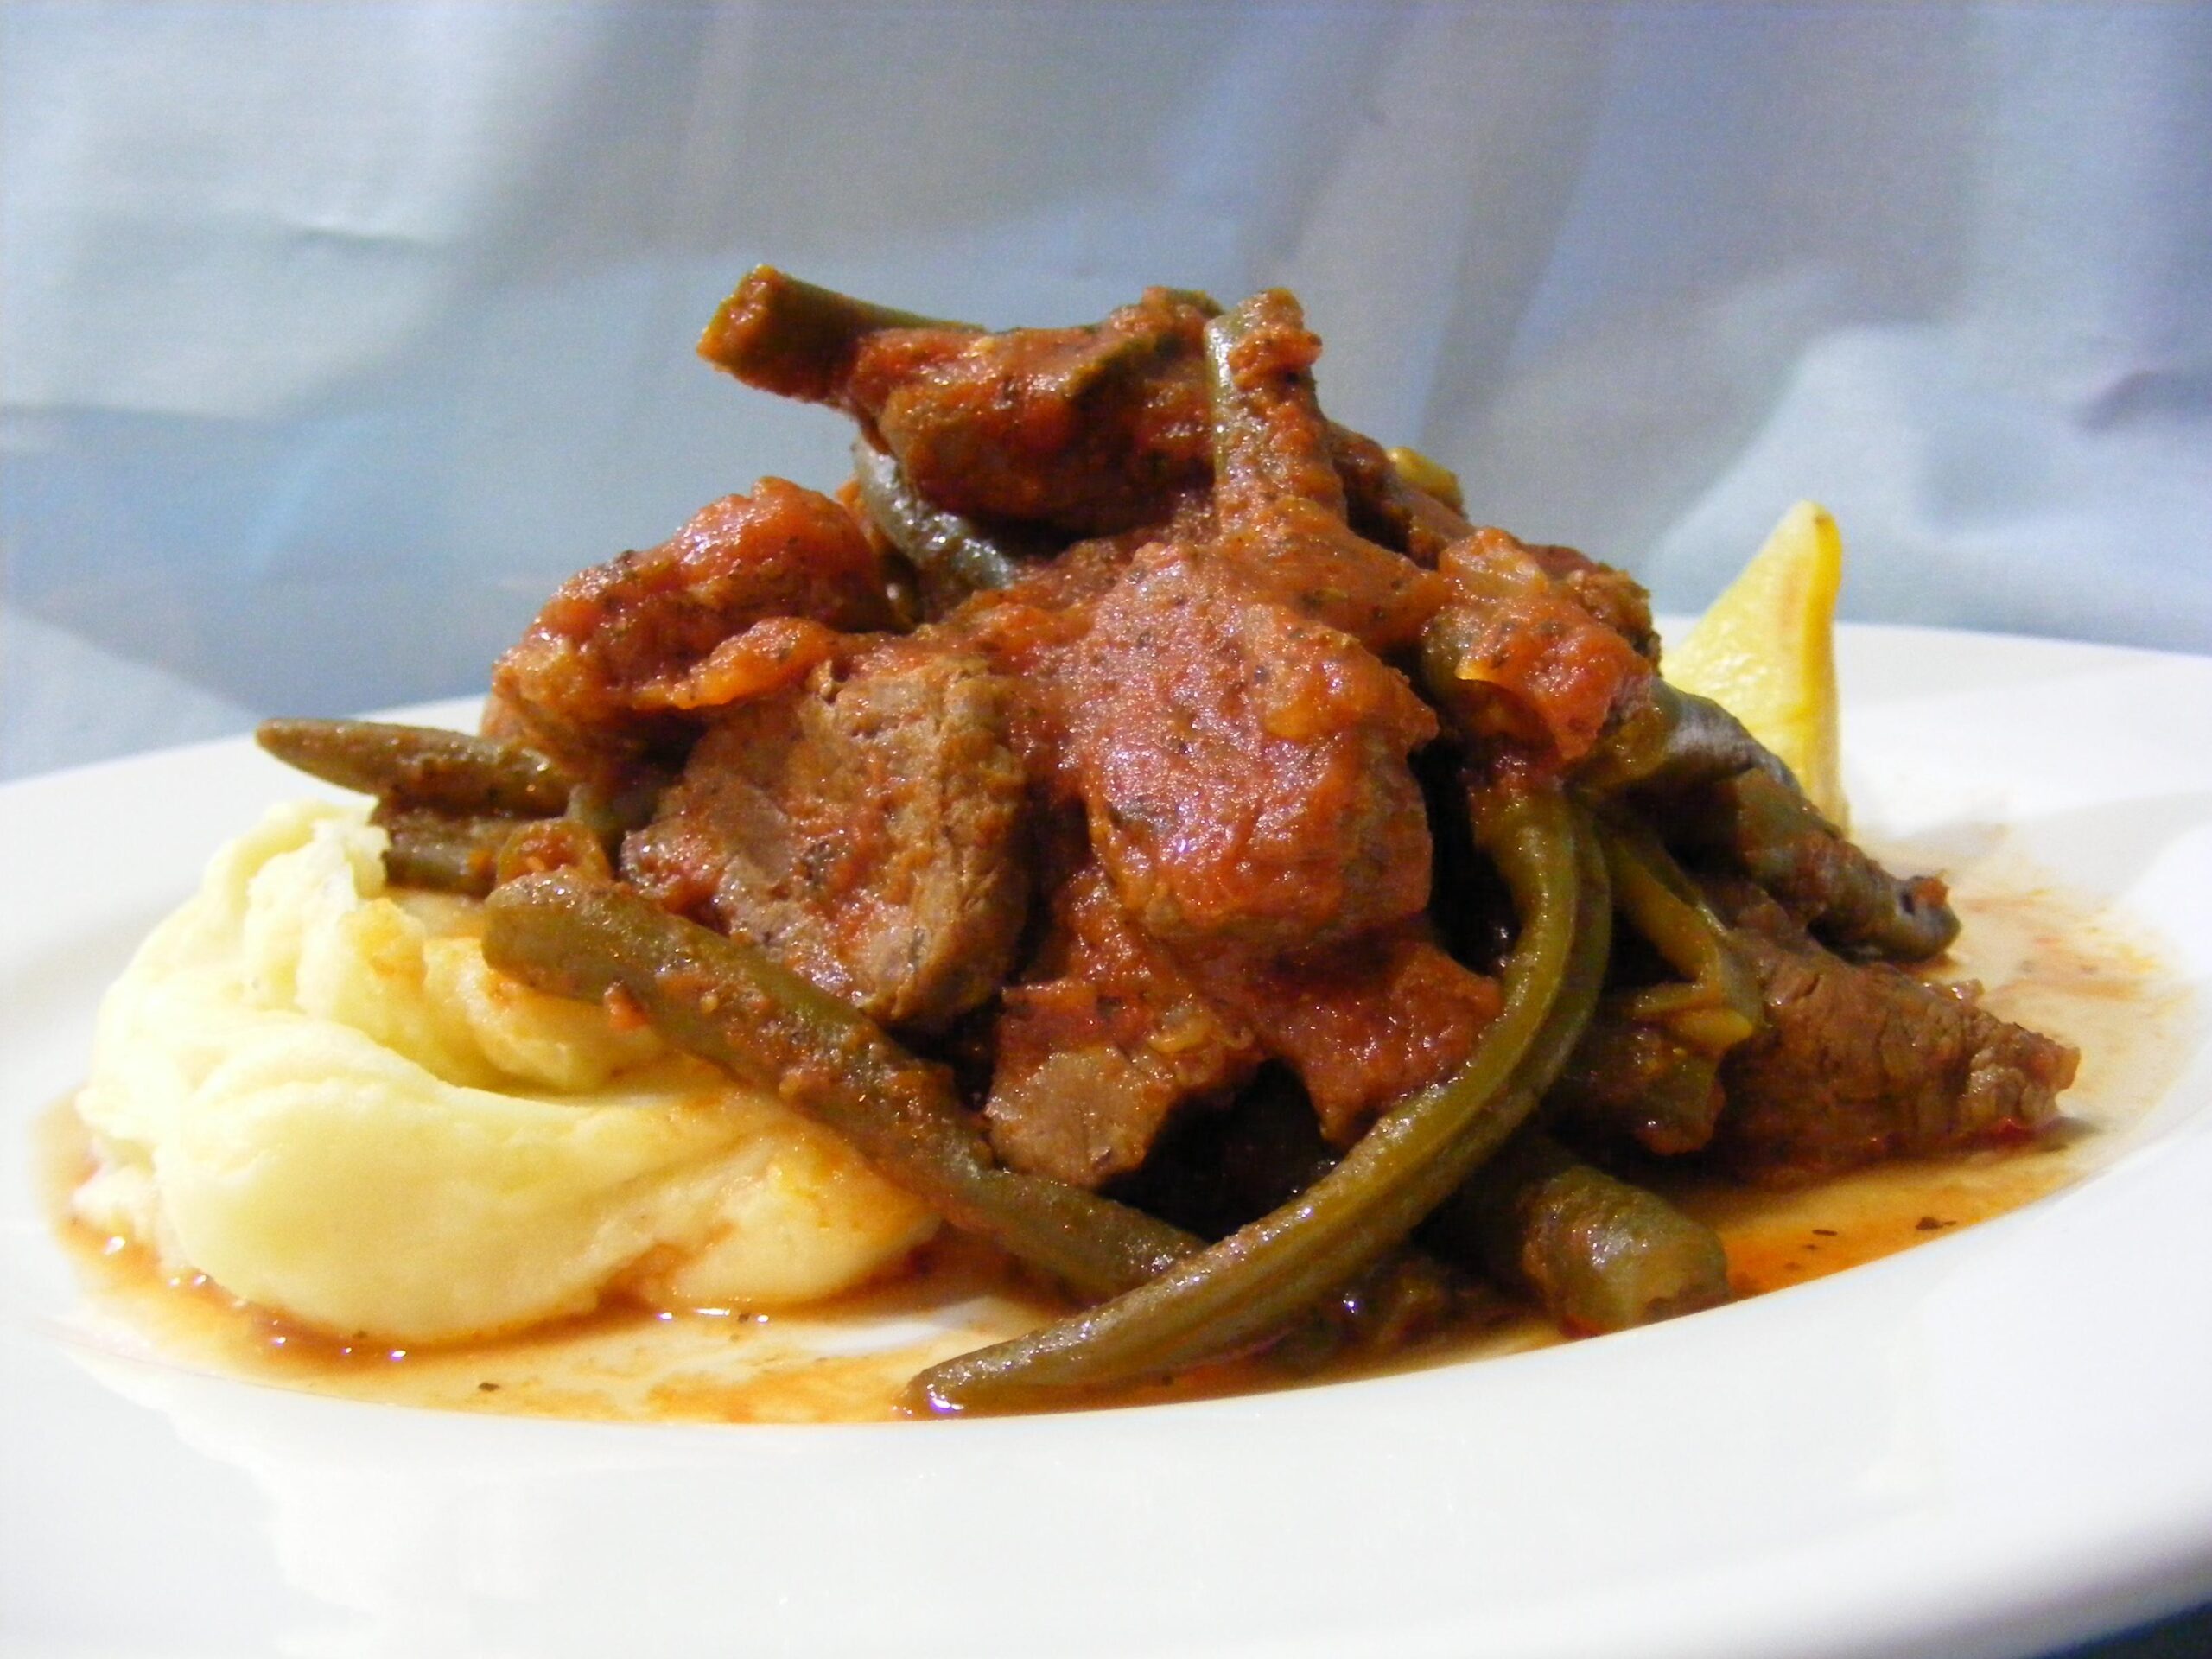 Braised Lamb With Red Wine, Coffee, and Cardamom